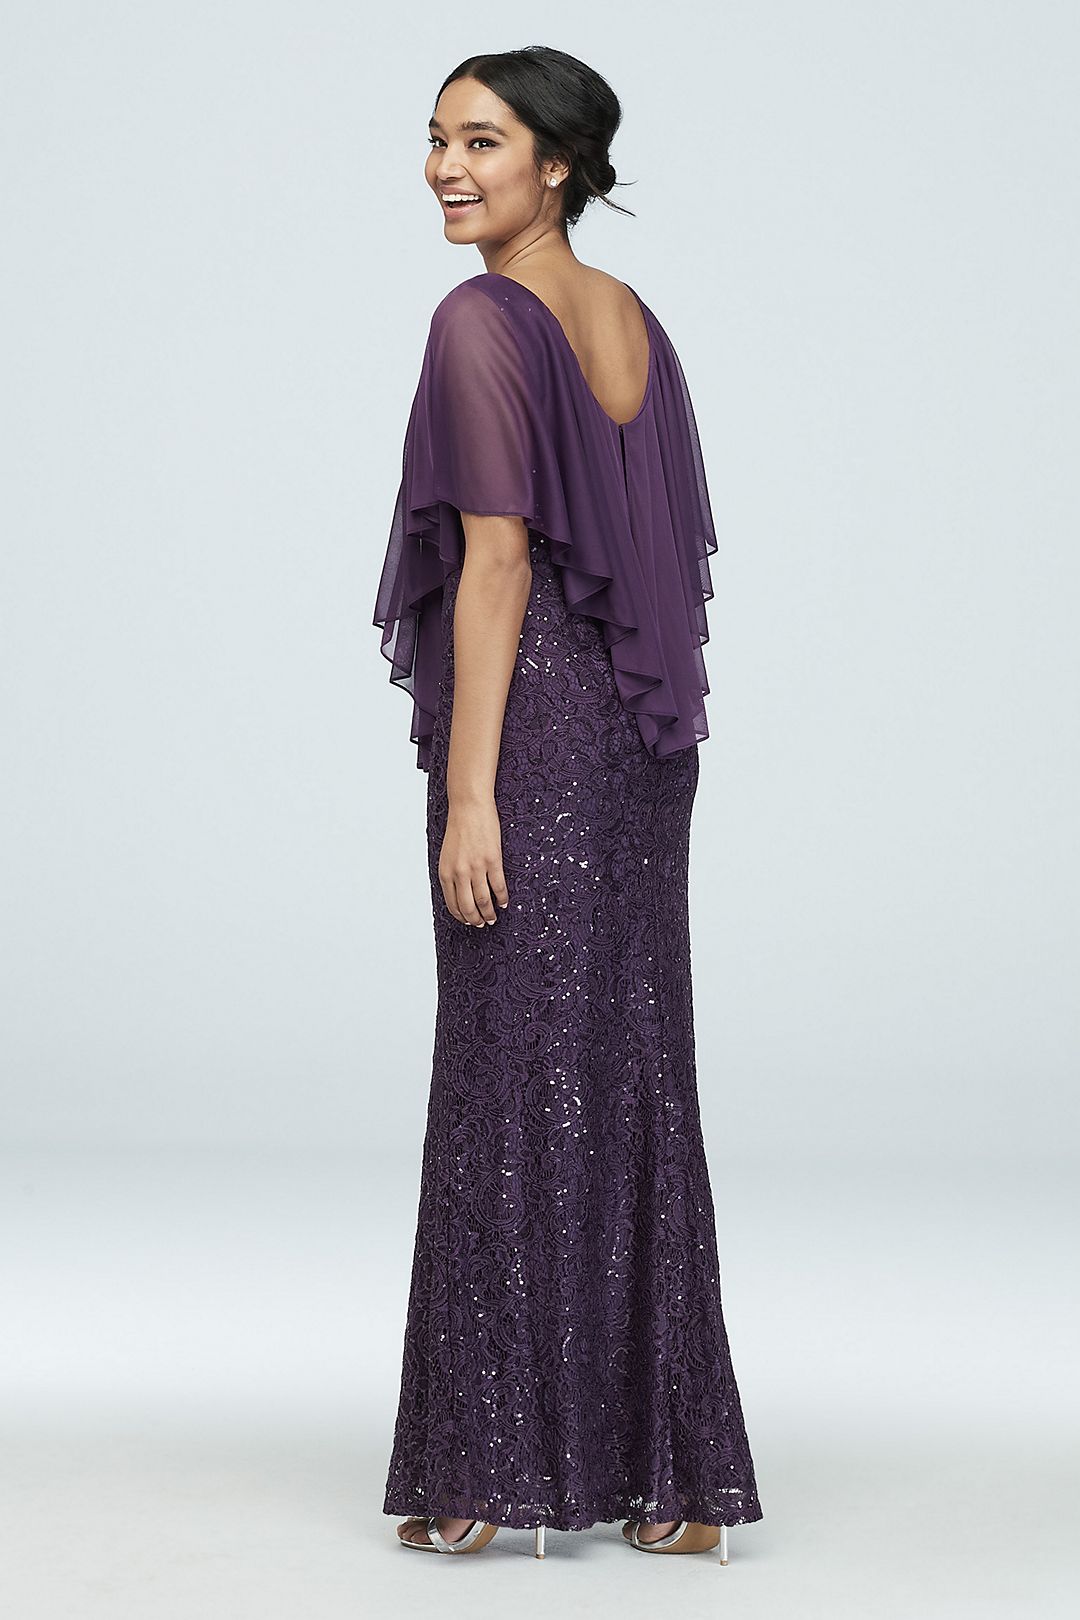 Sequin Lace Gown with Cold Shoulder Capelet Image 2